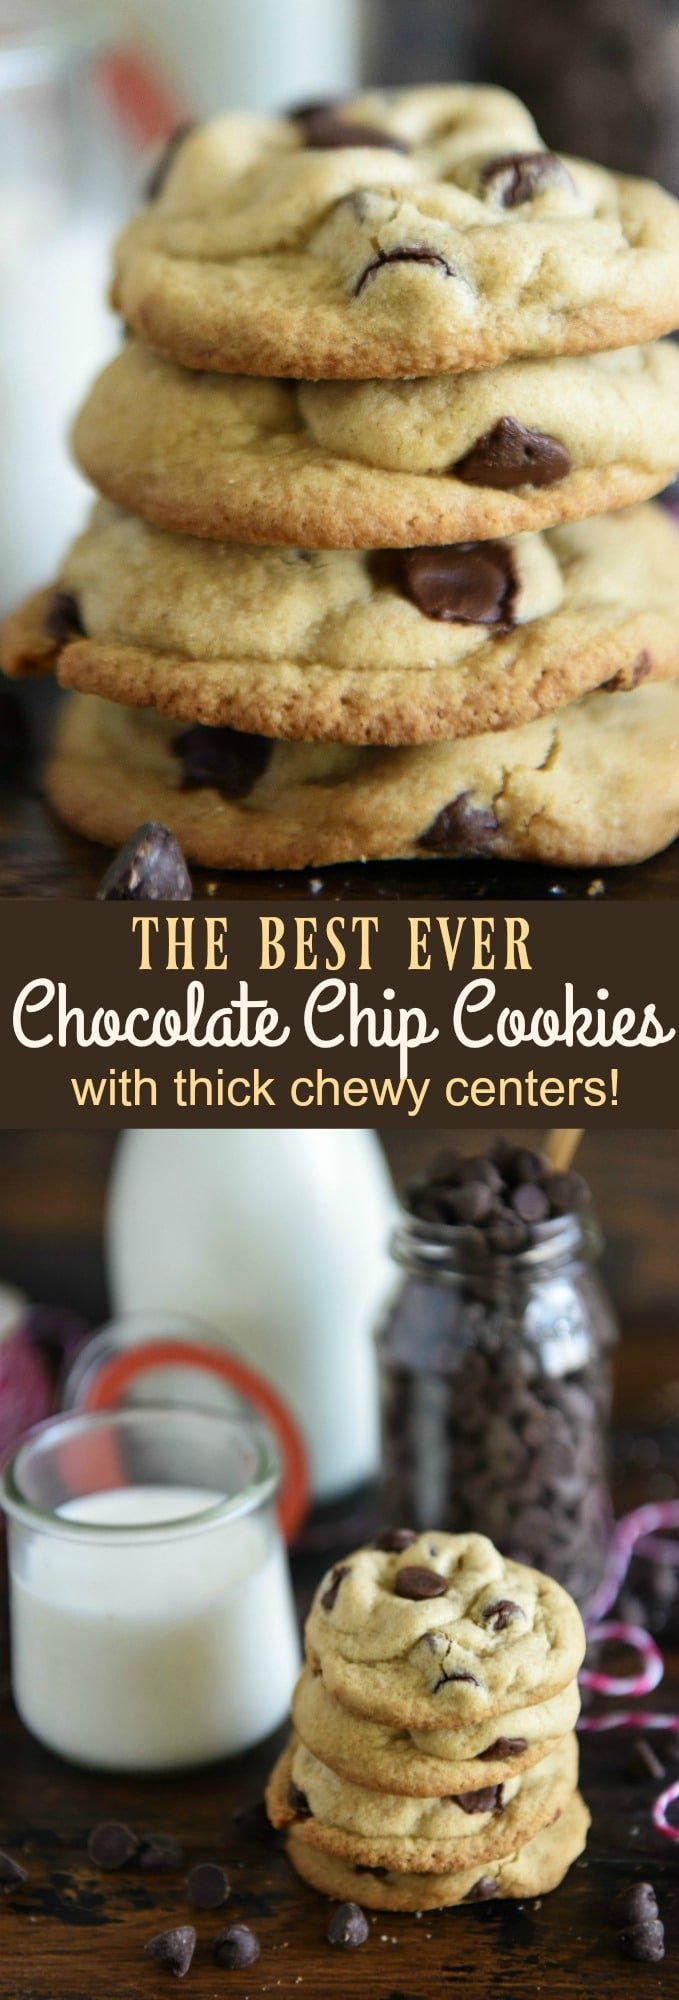 The Best Chocolate Chip Cookies: sharing my secret recipe for the best buttery chocolate chip cookies with thick, chewy centers and crispy cookie edges!